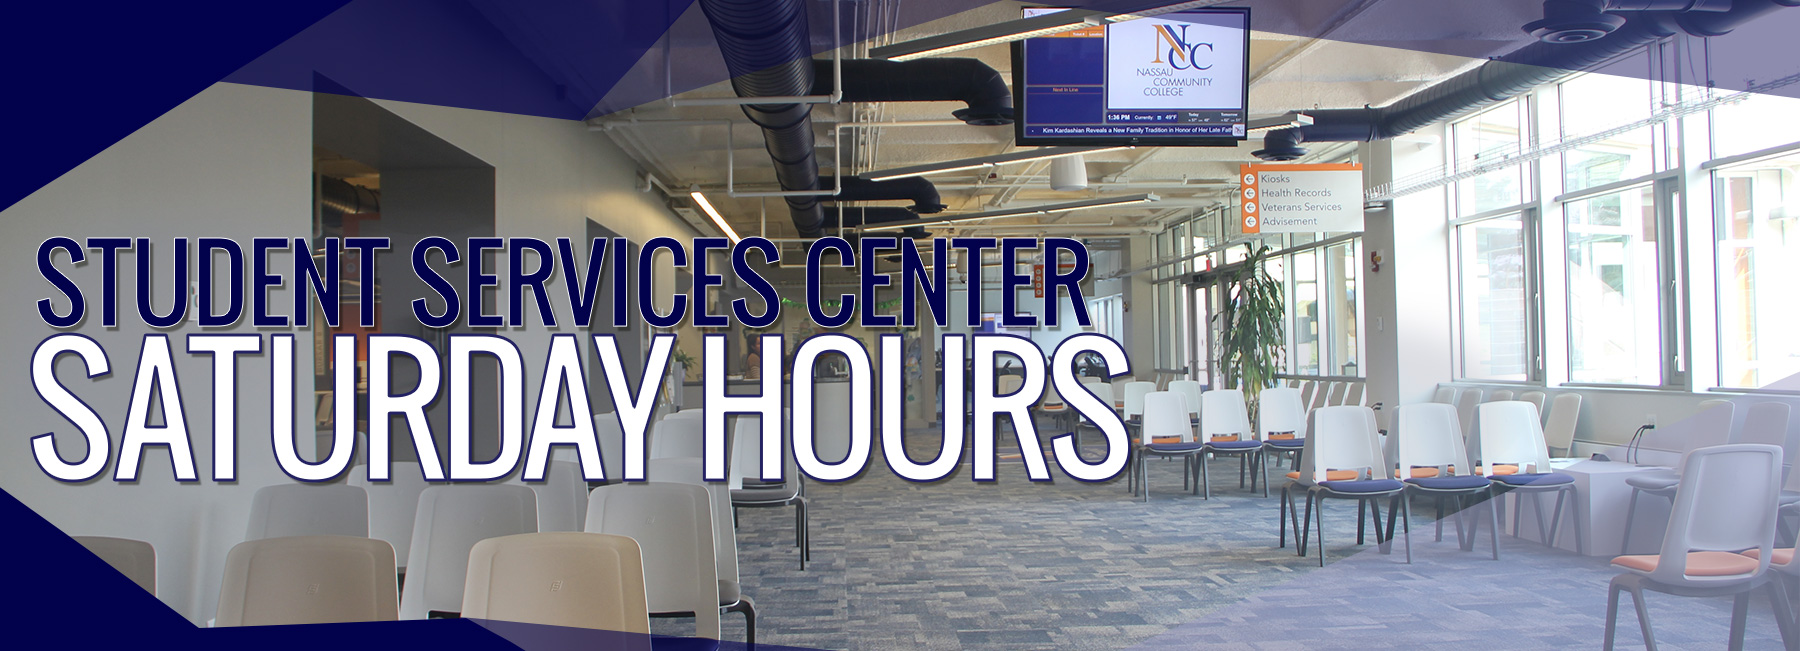 Student Services Center Saturday Hours